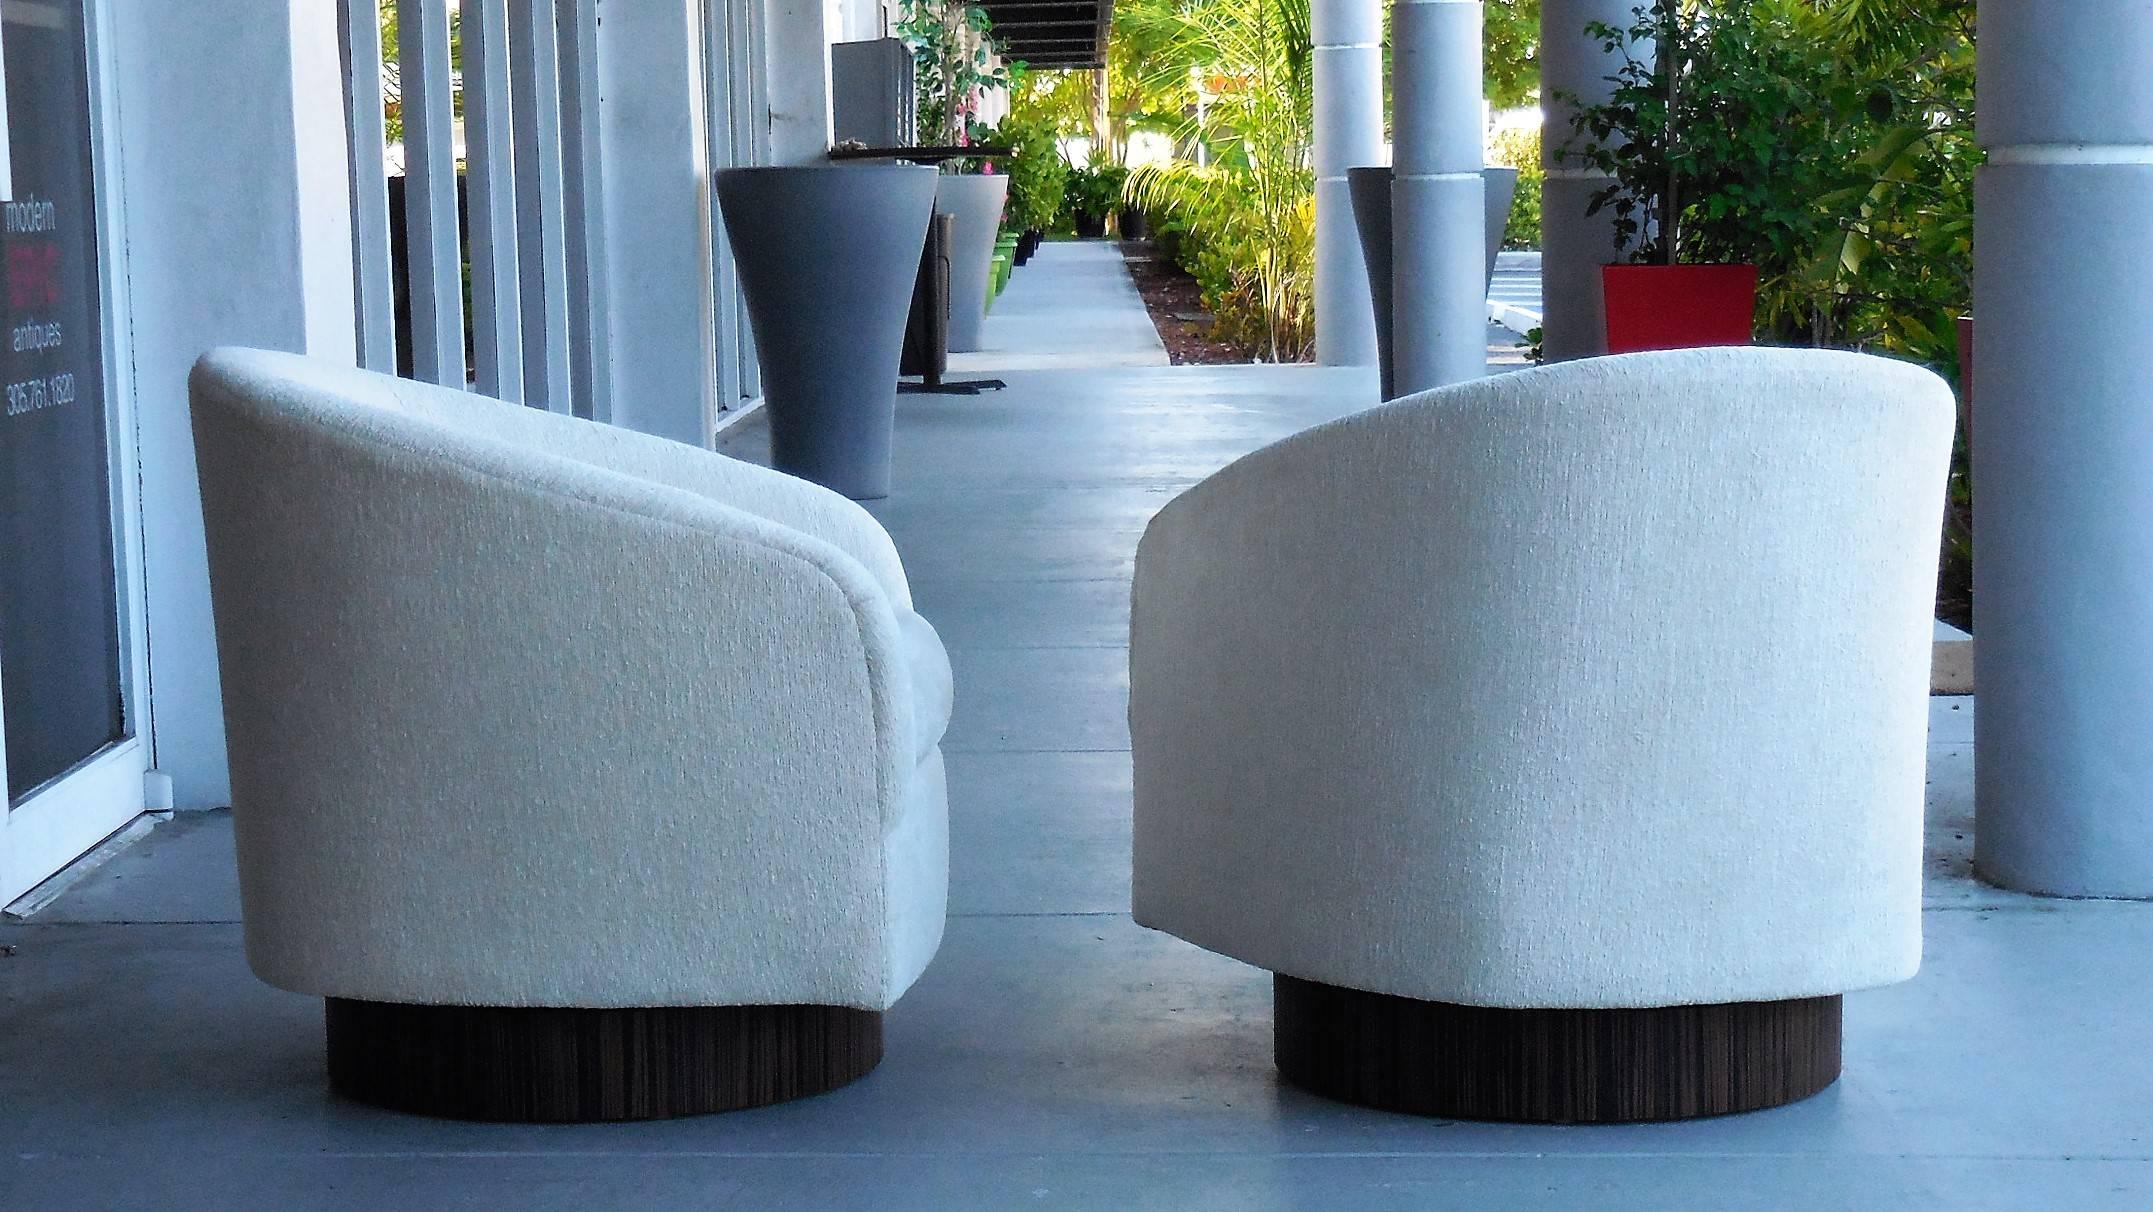 Super comfortable swivel chairs with Macassar bases.